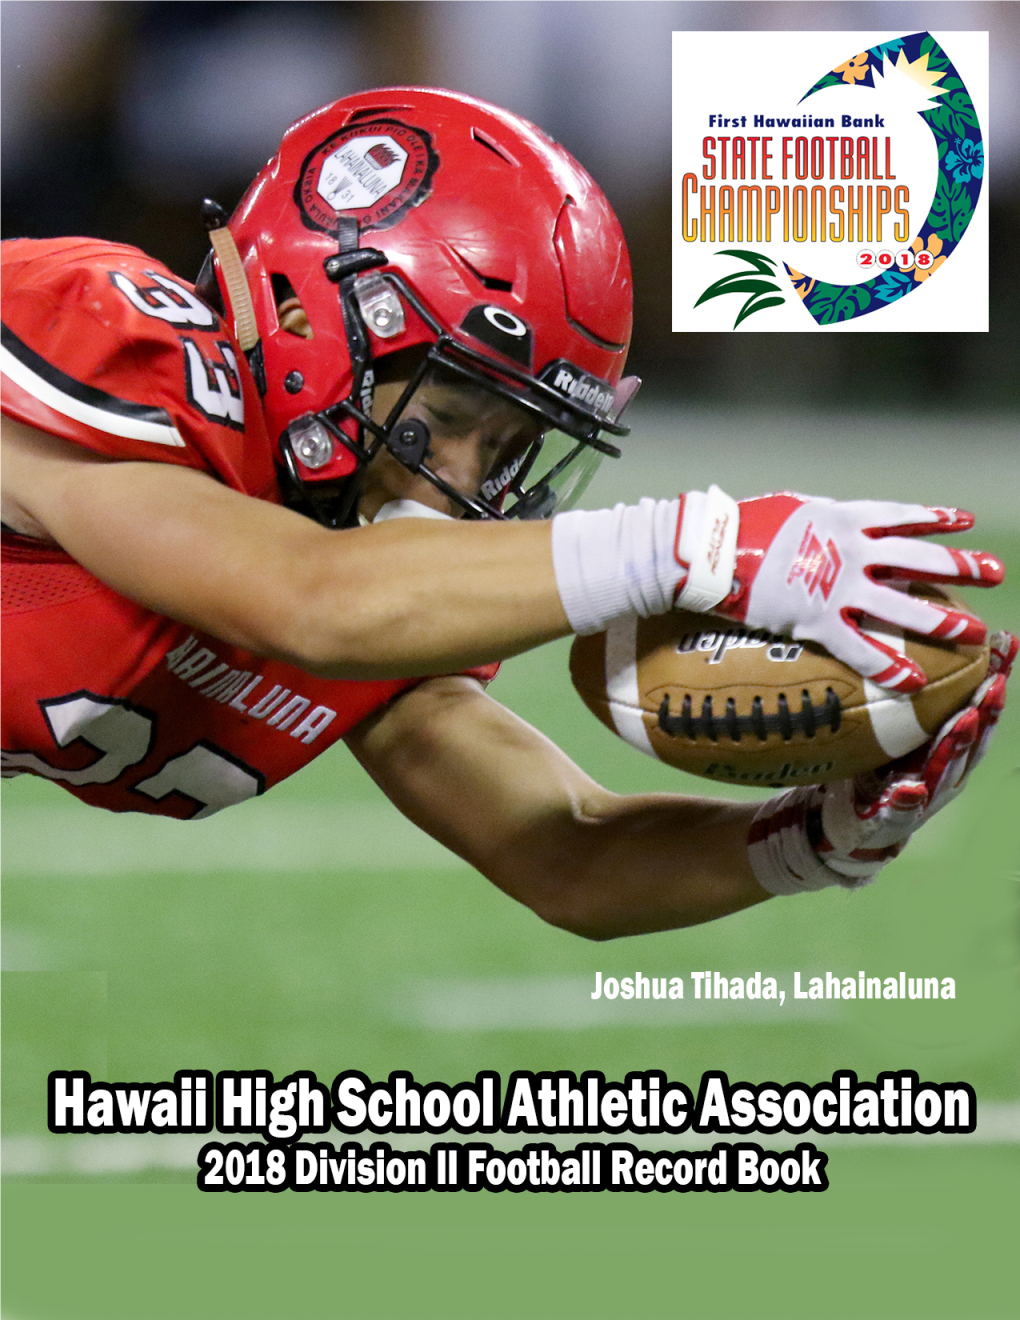 Hawaii High School Athletic Association Football Record Book Division I (1999-Present), Division II (1999-Present), Division I-Open (2016-Present)